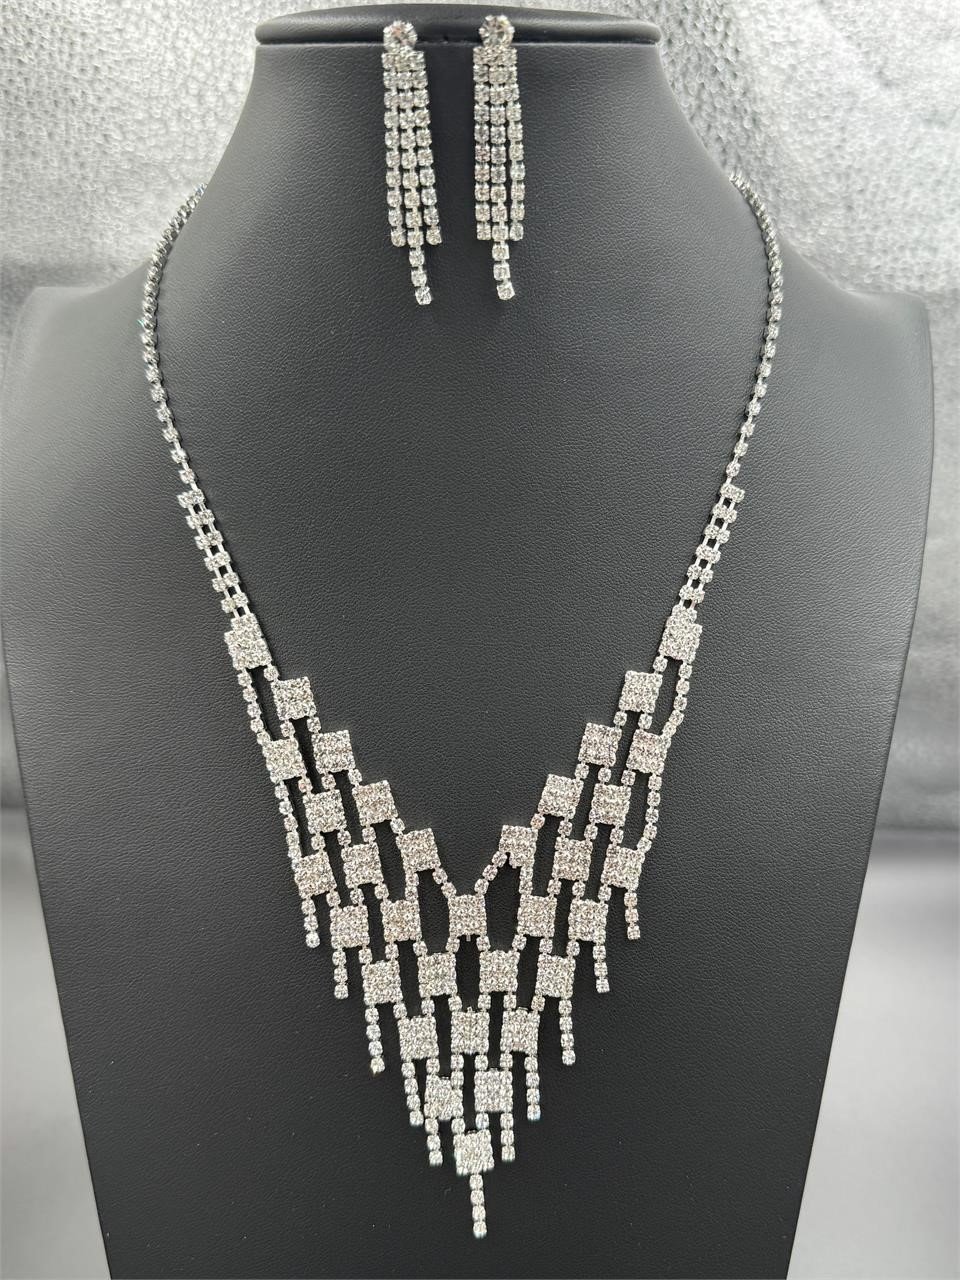 Swarovski Style Crystal Necklace and Earring Set